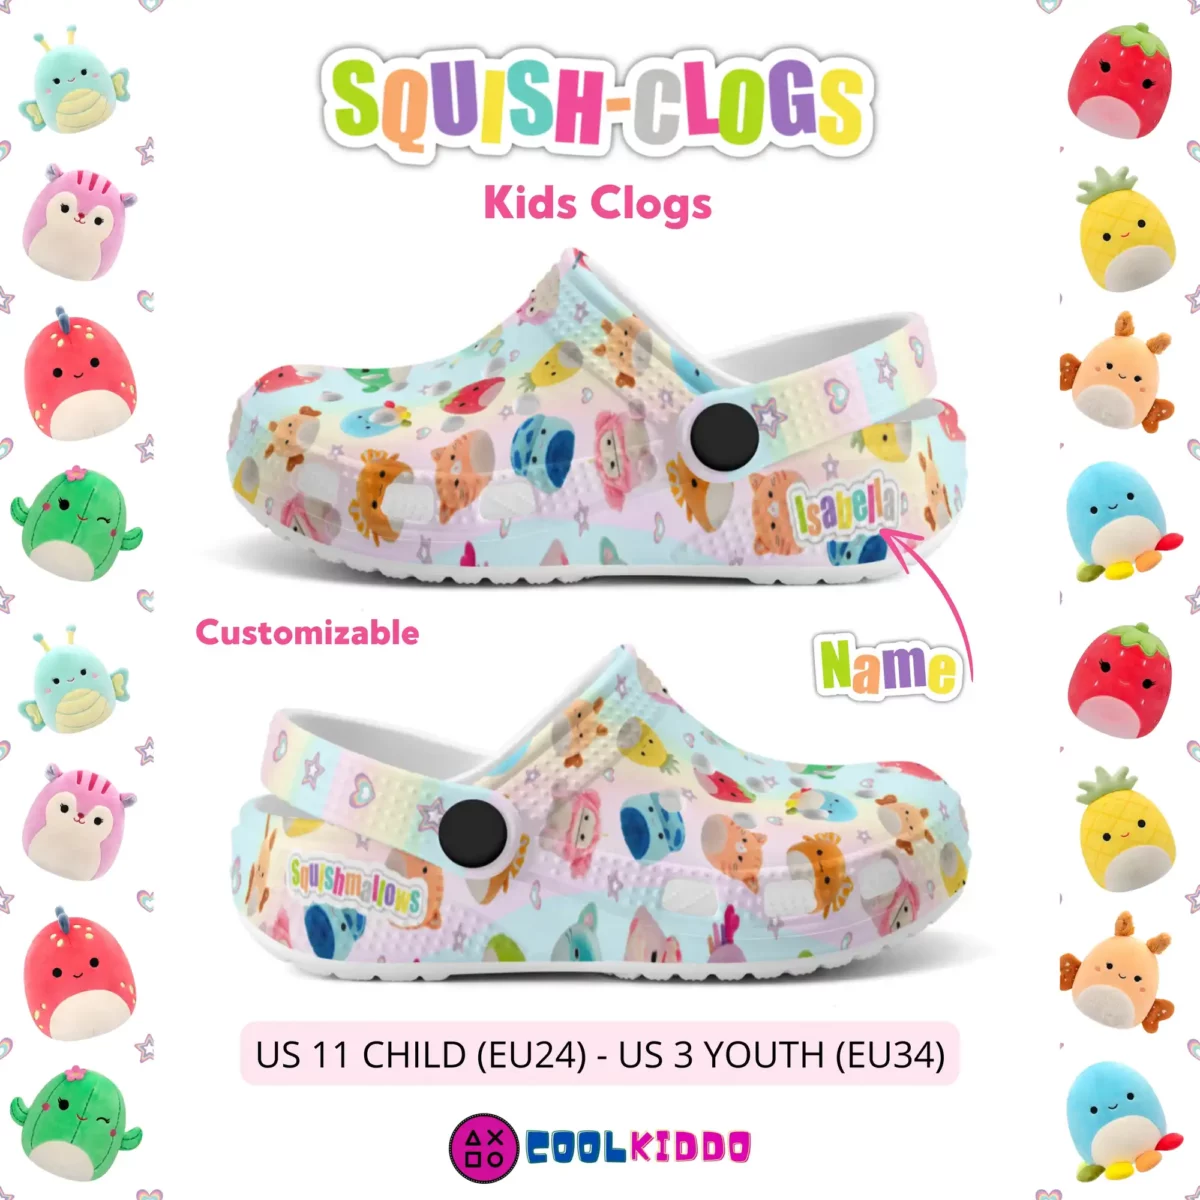 Personalized Squishmallows Clogs Shoes, Girls Clogs Shoes, Funny Crocs Clogs, Crocband Cool Kiddo 10